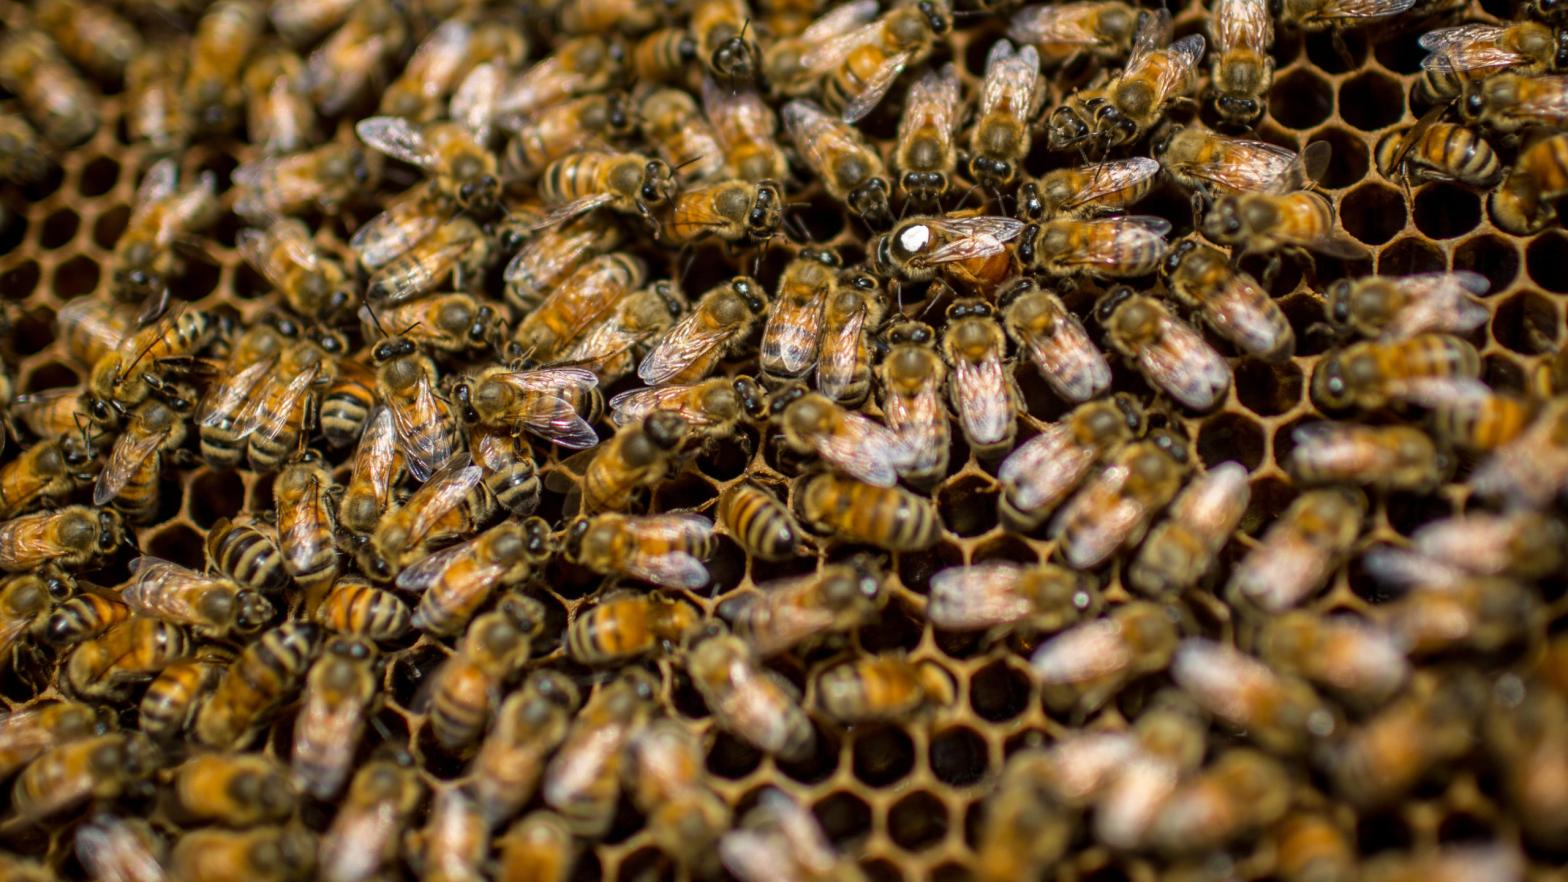 Eastern honeybees at the Ginza Honey Bee Project in Tokyo, Japan in 2014. (Photo: Chris McGrath, Getty Images)